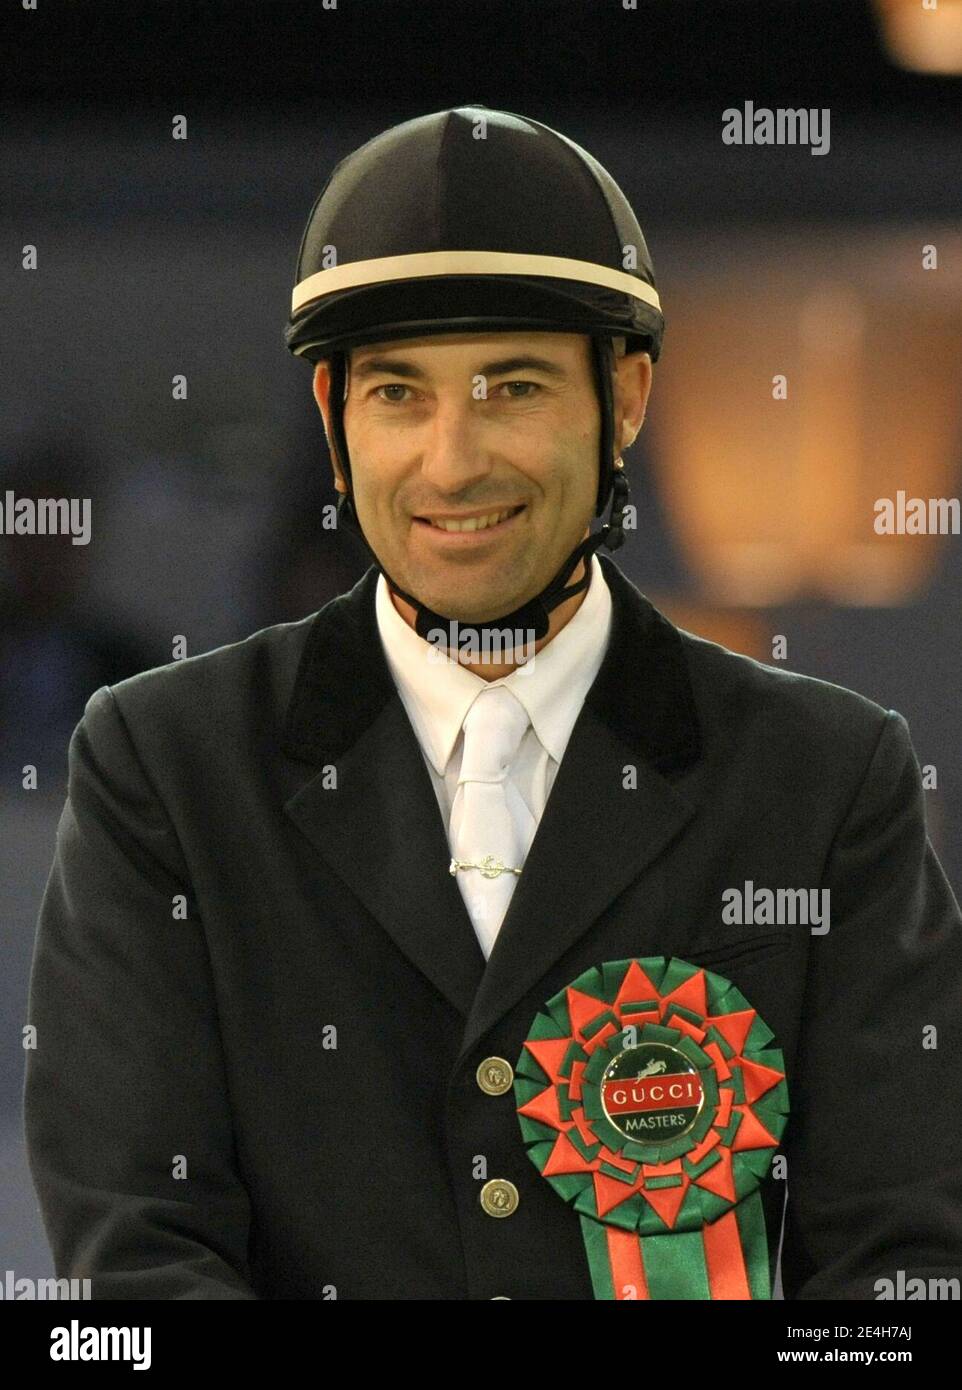 French humorist Nicolas Canteloup and former Swiss tennis champion Martina  Hingis to win 5th and 6th place at the Gucci Master Jumping in Villepinte,  Paris, France, on December 11, 2009. Photo by